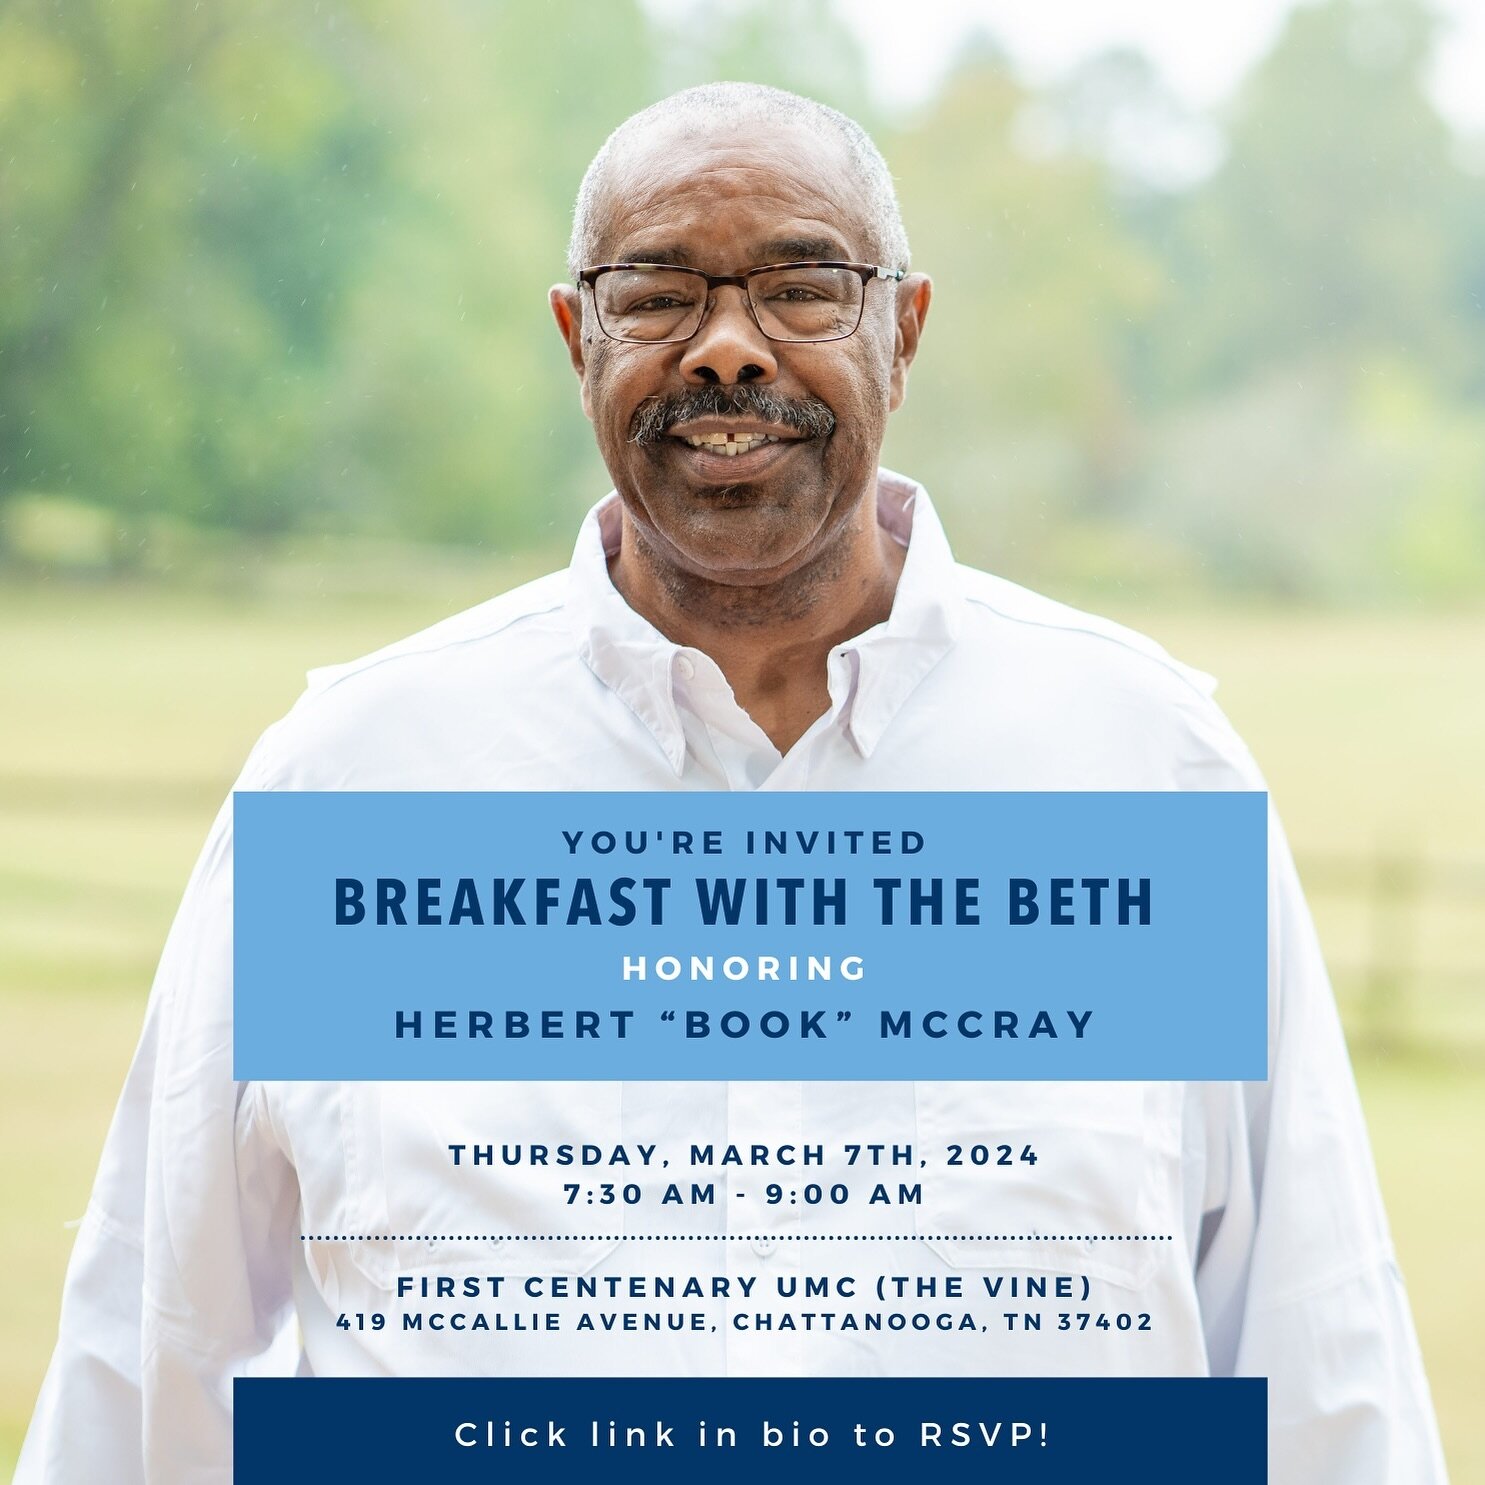 Can you believe it is already March 1st?! Don&rsquo;t forget that Breakfast with the Beth is coming up fast. Join us on March 7th, from 7:30 am - 9:00 am at First Centenary UMC in the Vine Building for breakfast and honoring Book McCray. RSVP by clic